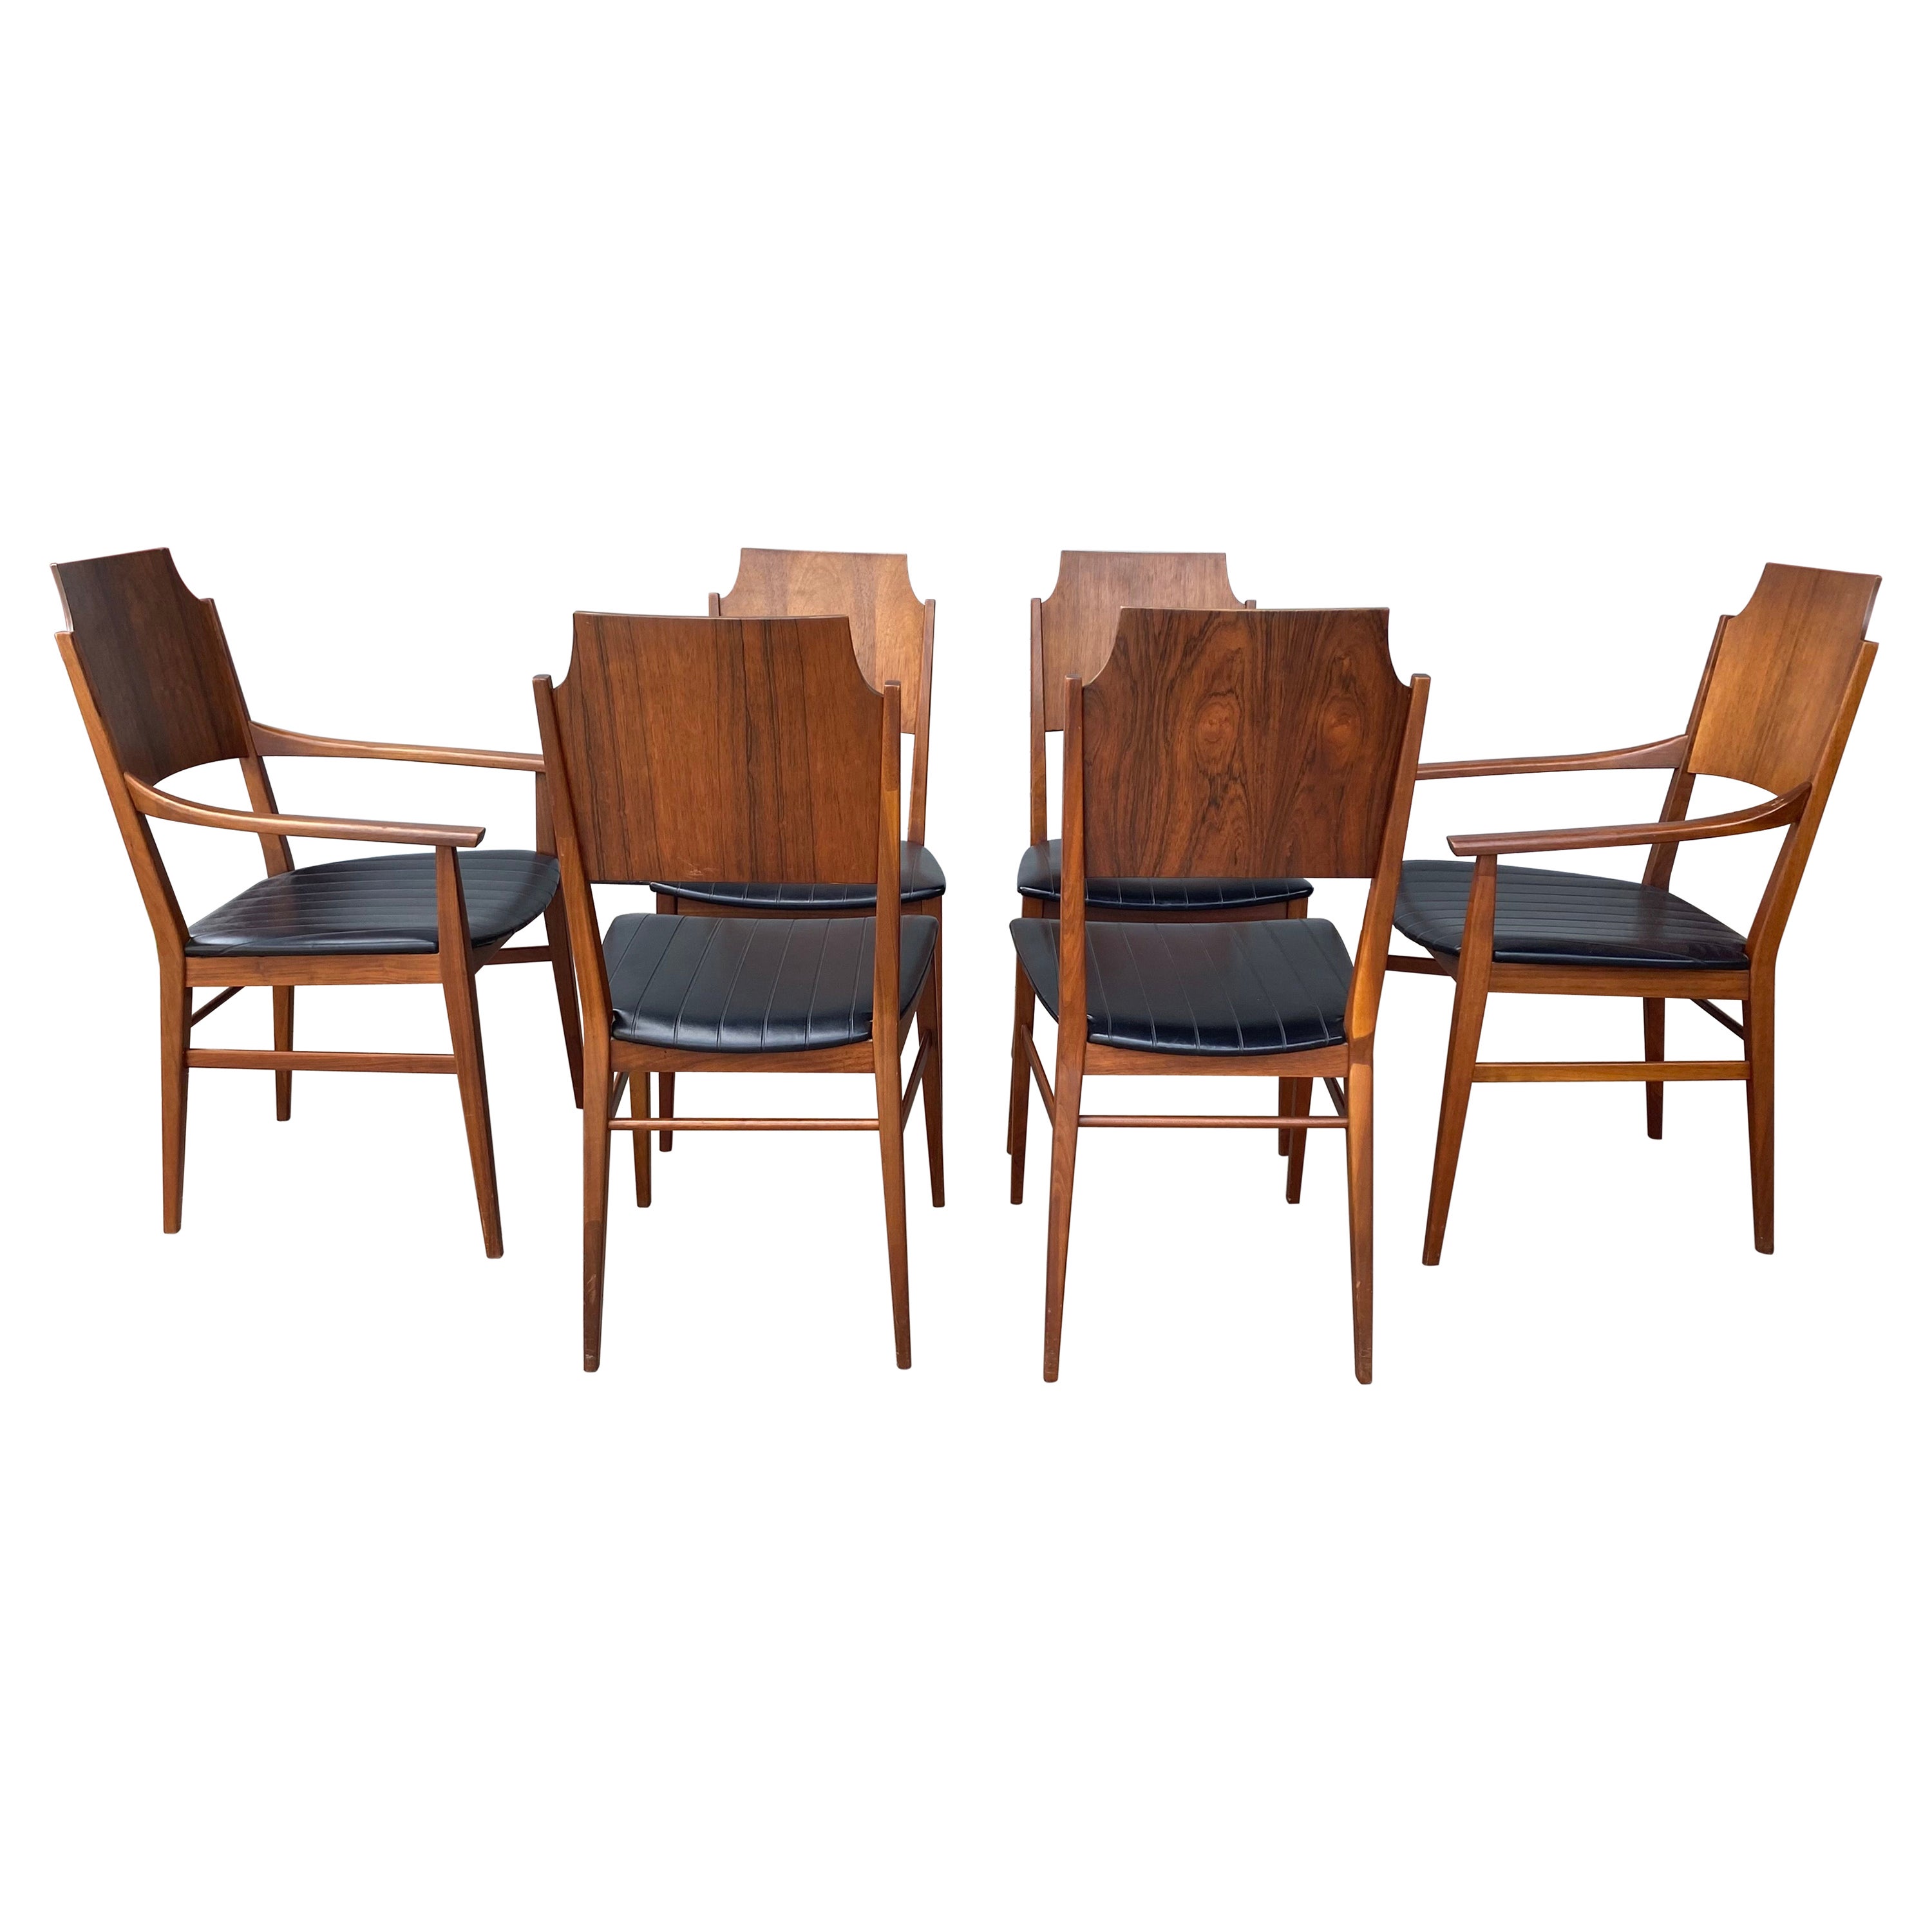 Set 6 Rosewood Dining Chairs, Paul McCobb, Delineator